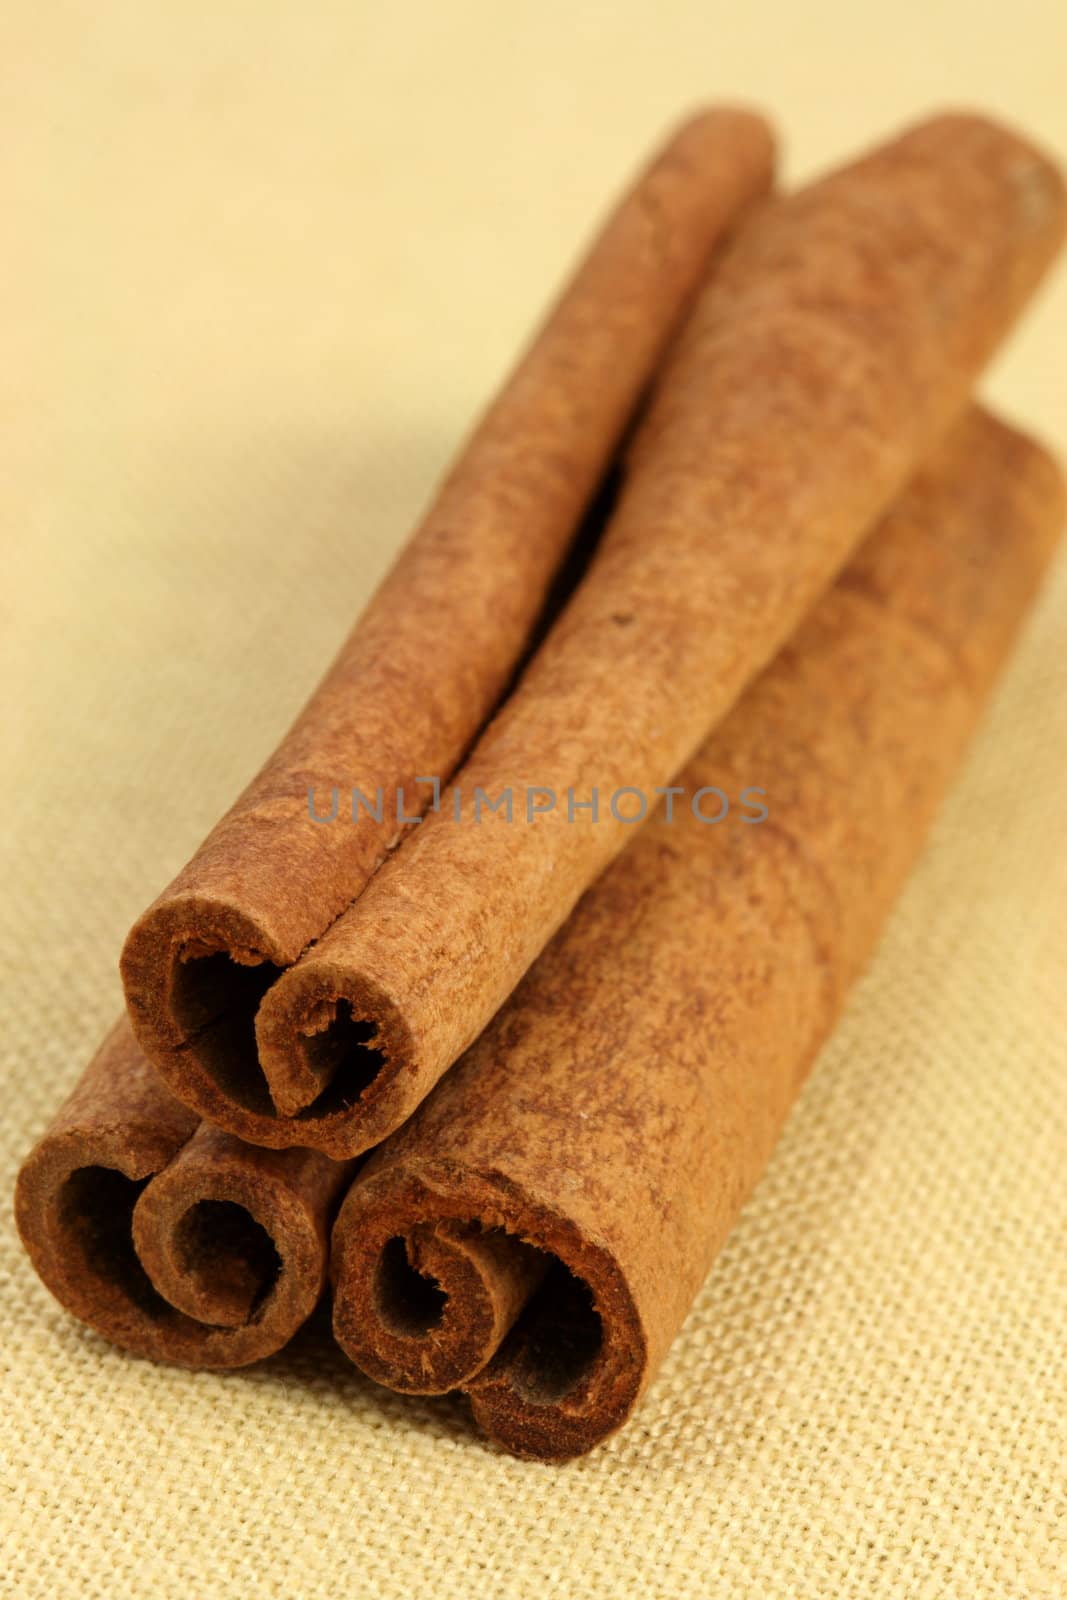 fancy cinnamon sticks delicious baking and cooking ingredient   